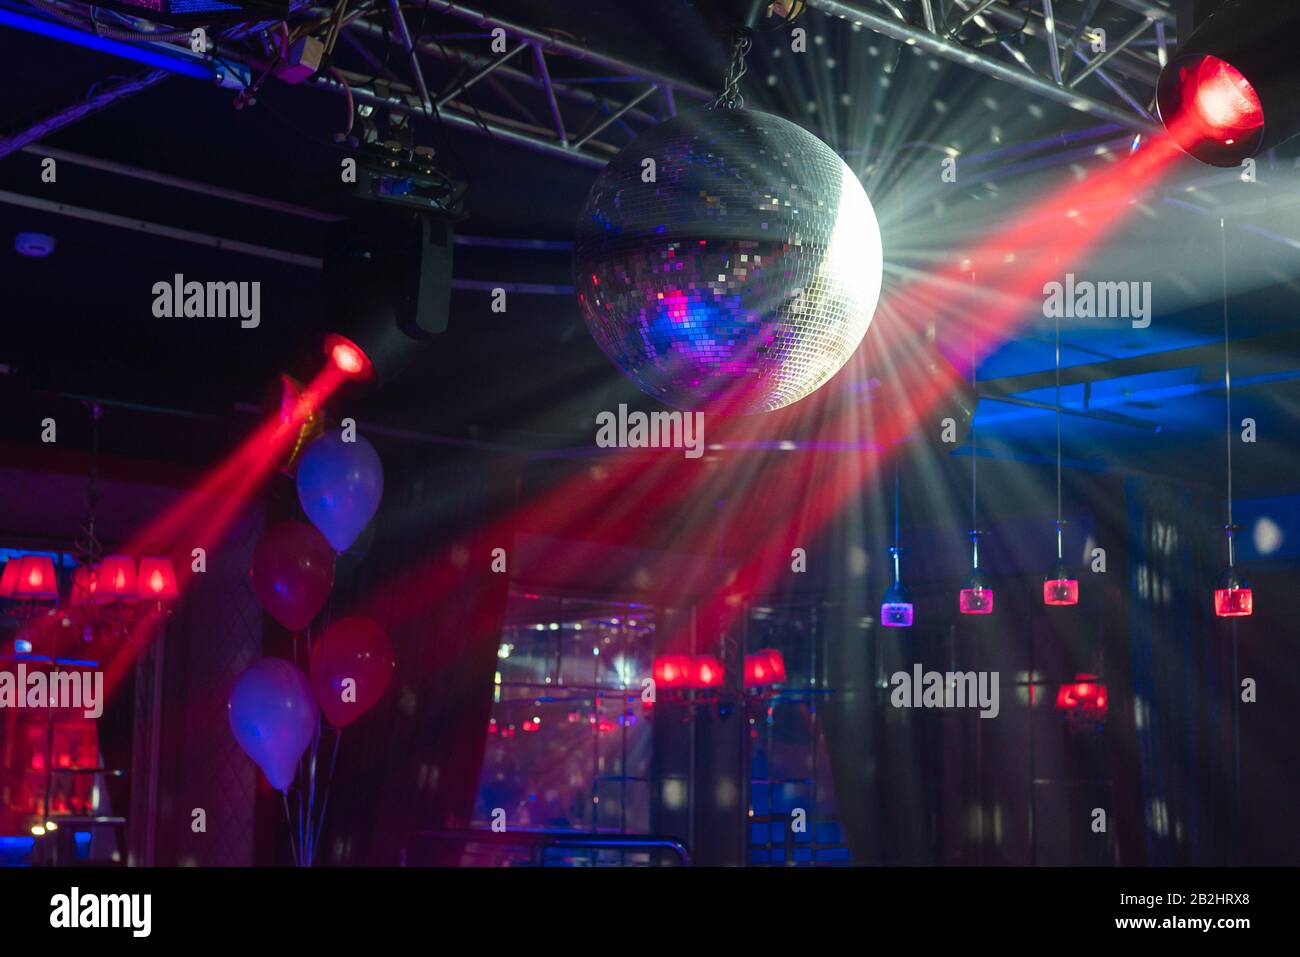 Abstract background from a night club. party lights disco ball Stock Photo